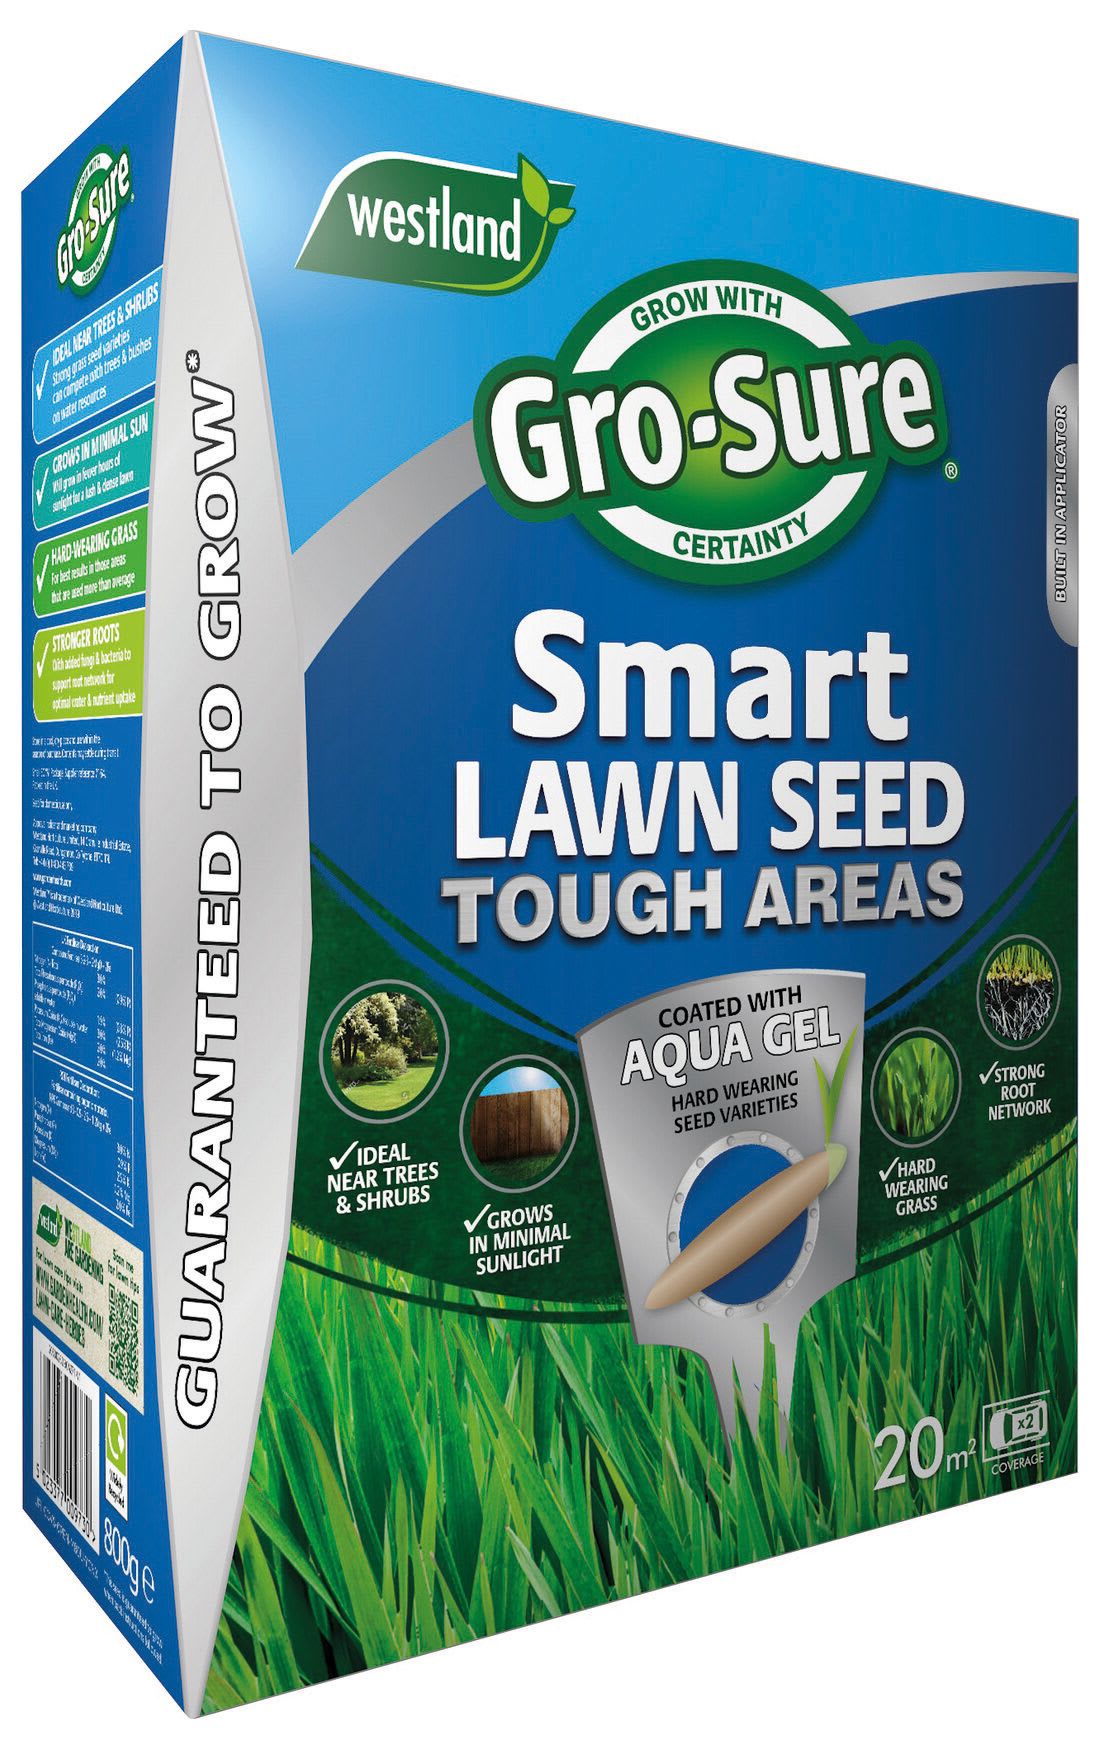 Gro-Sure Tough Areas Smart Seed - 20m²